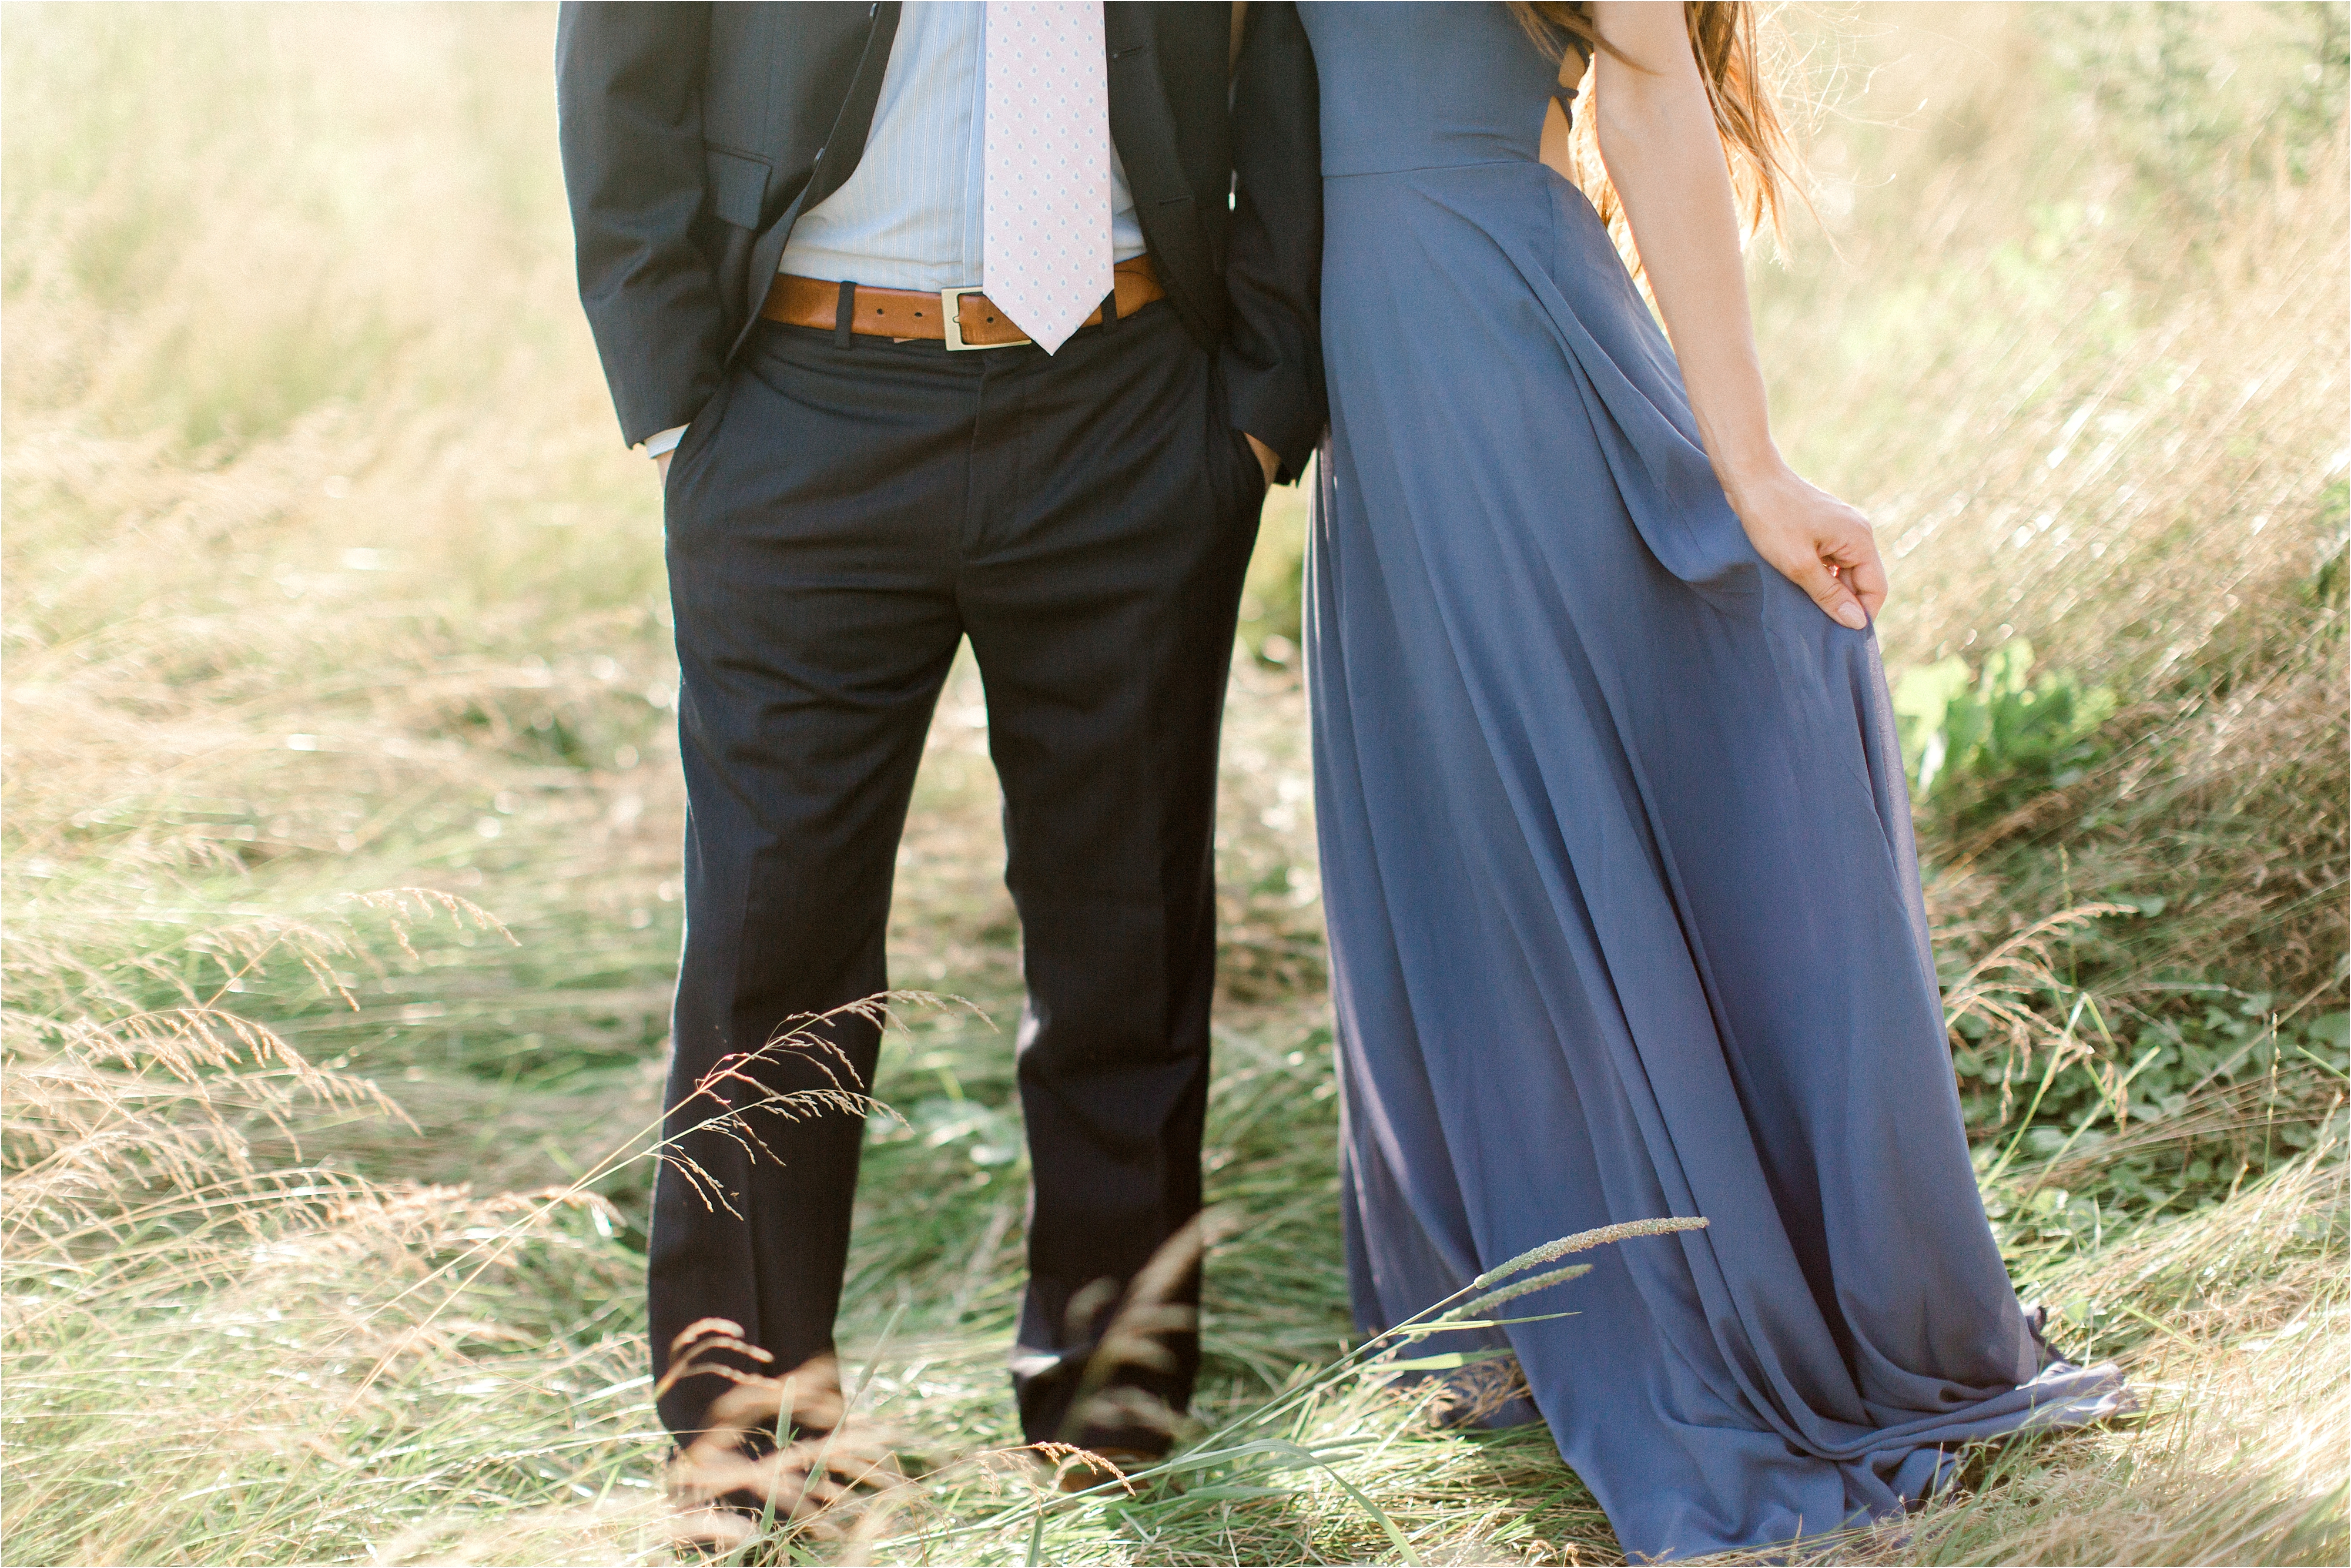 Long blue dress engagement session in field 